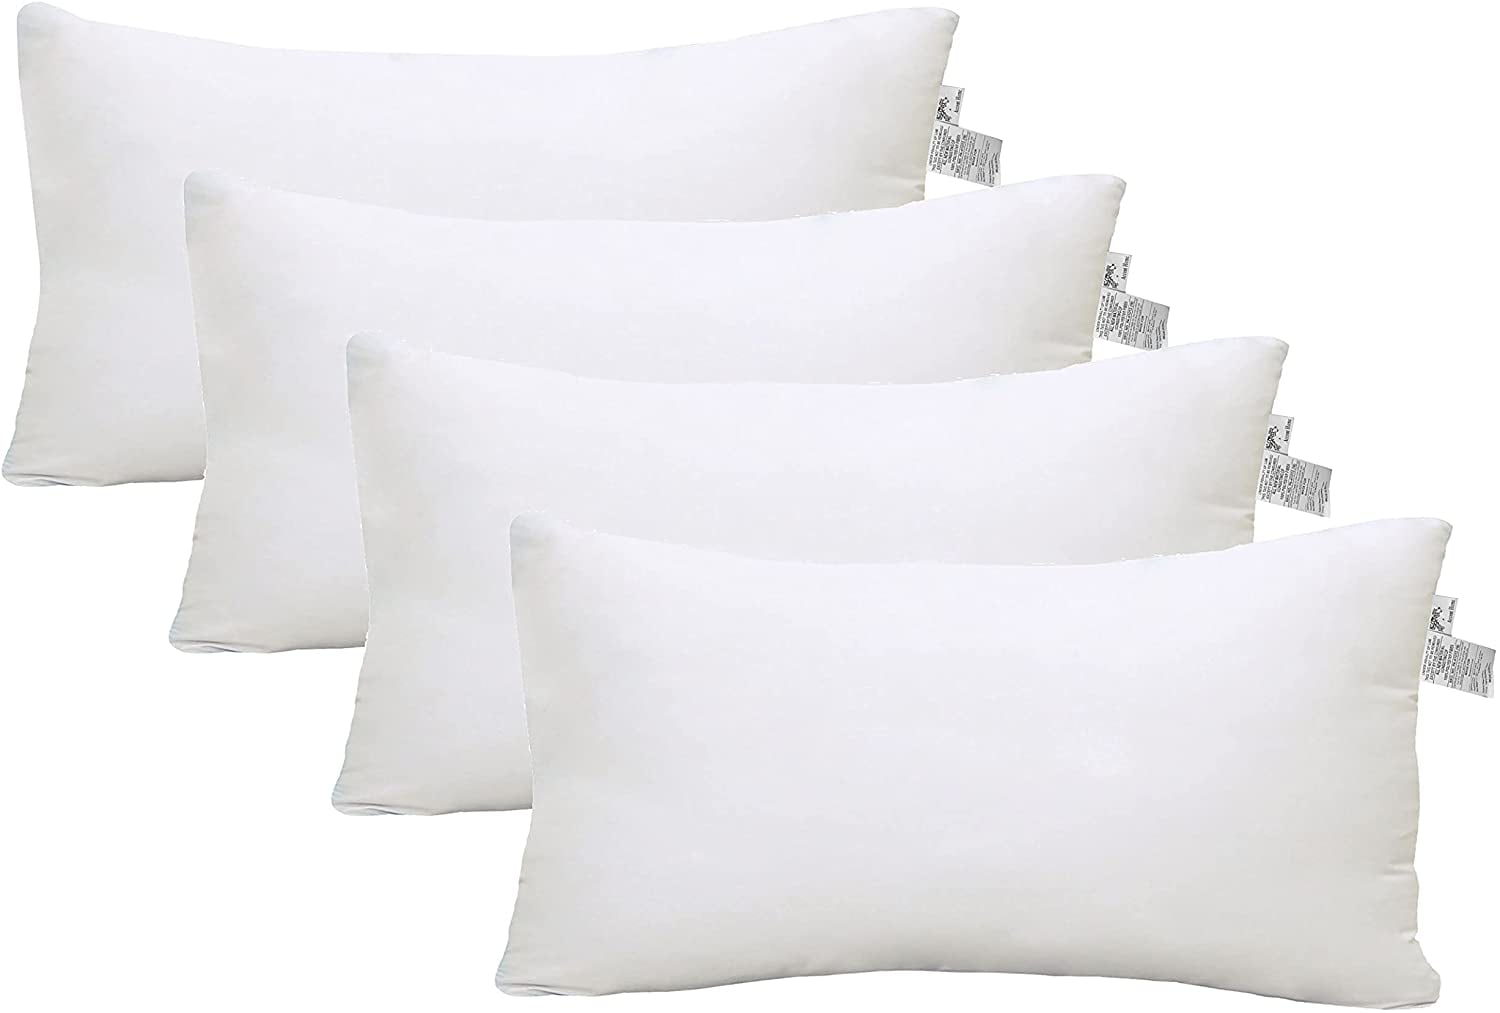 Throw Pillow Insert 18x18 inch Set of 8 pc. Hotel Bed Decorative Throw  Pillow Covers Hypoallergenic Square Cushion Pillow Filler by Looms & Linens  